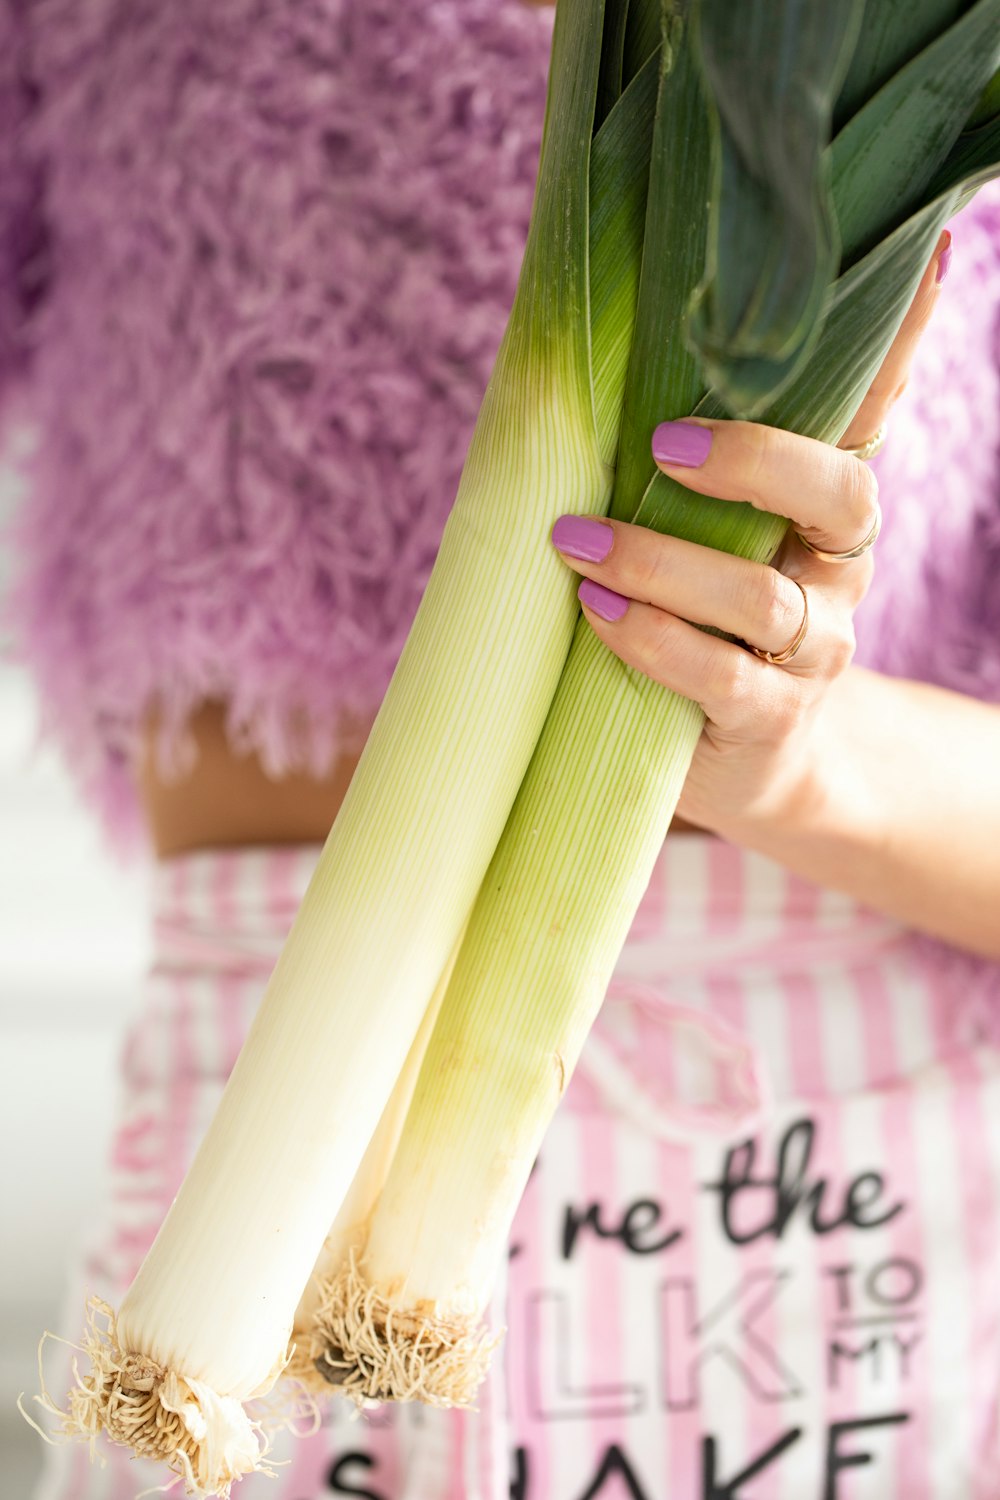 a woman holding a stalk of celery in her hands